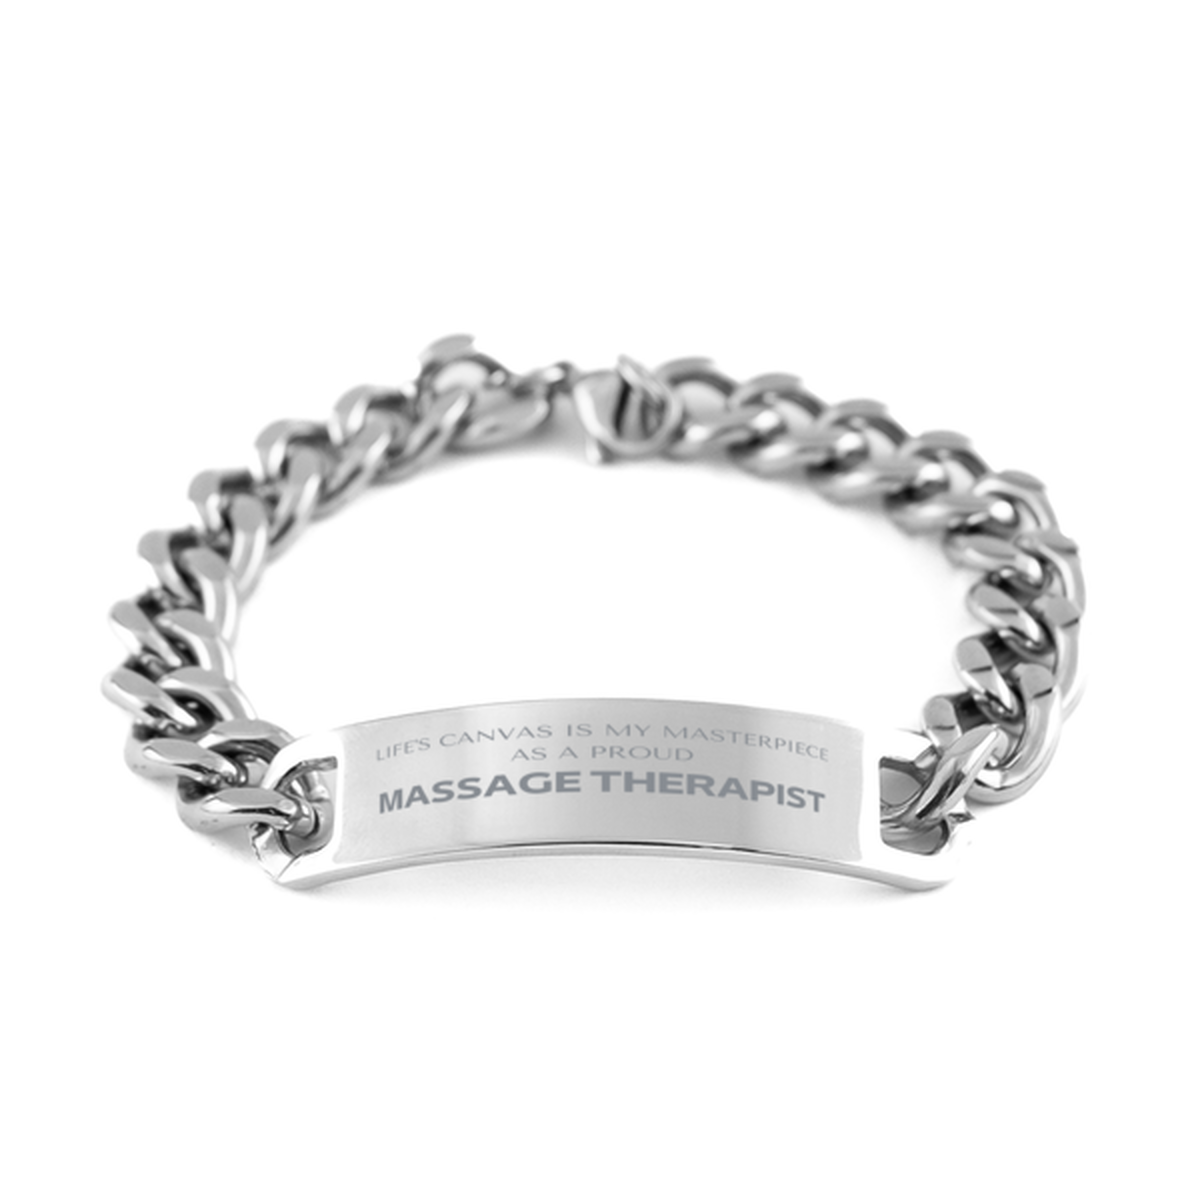 Proud Massage Therapist Gifts, Life's canvas is my masterpiece, Epic Birthday Christmas Unique Cuban Chain Stainless Steel Bracelet For Massage Therapist, Coworkers, Men, Women, Friends